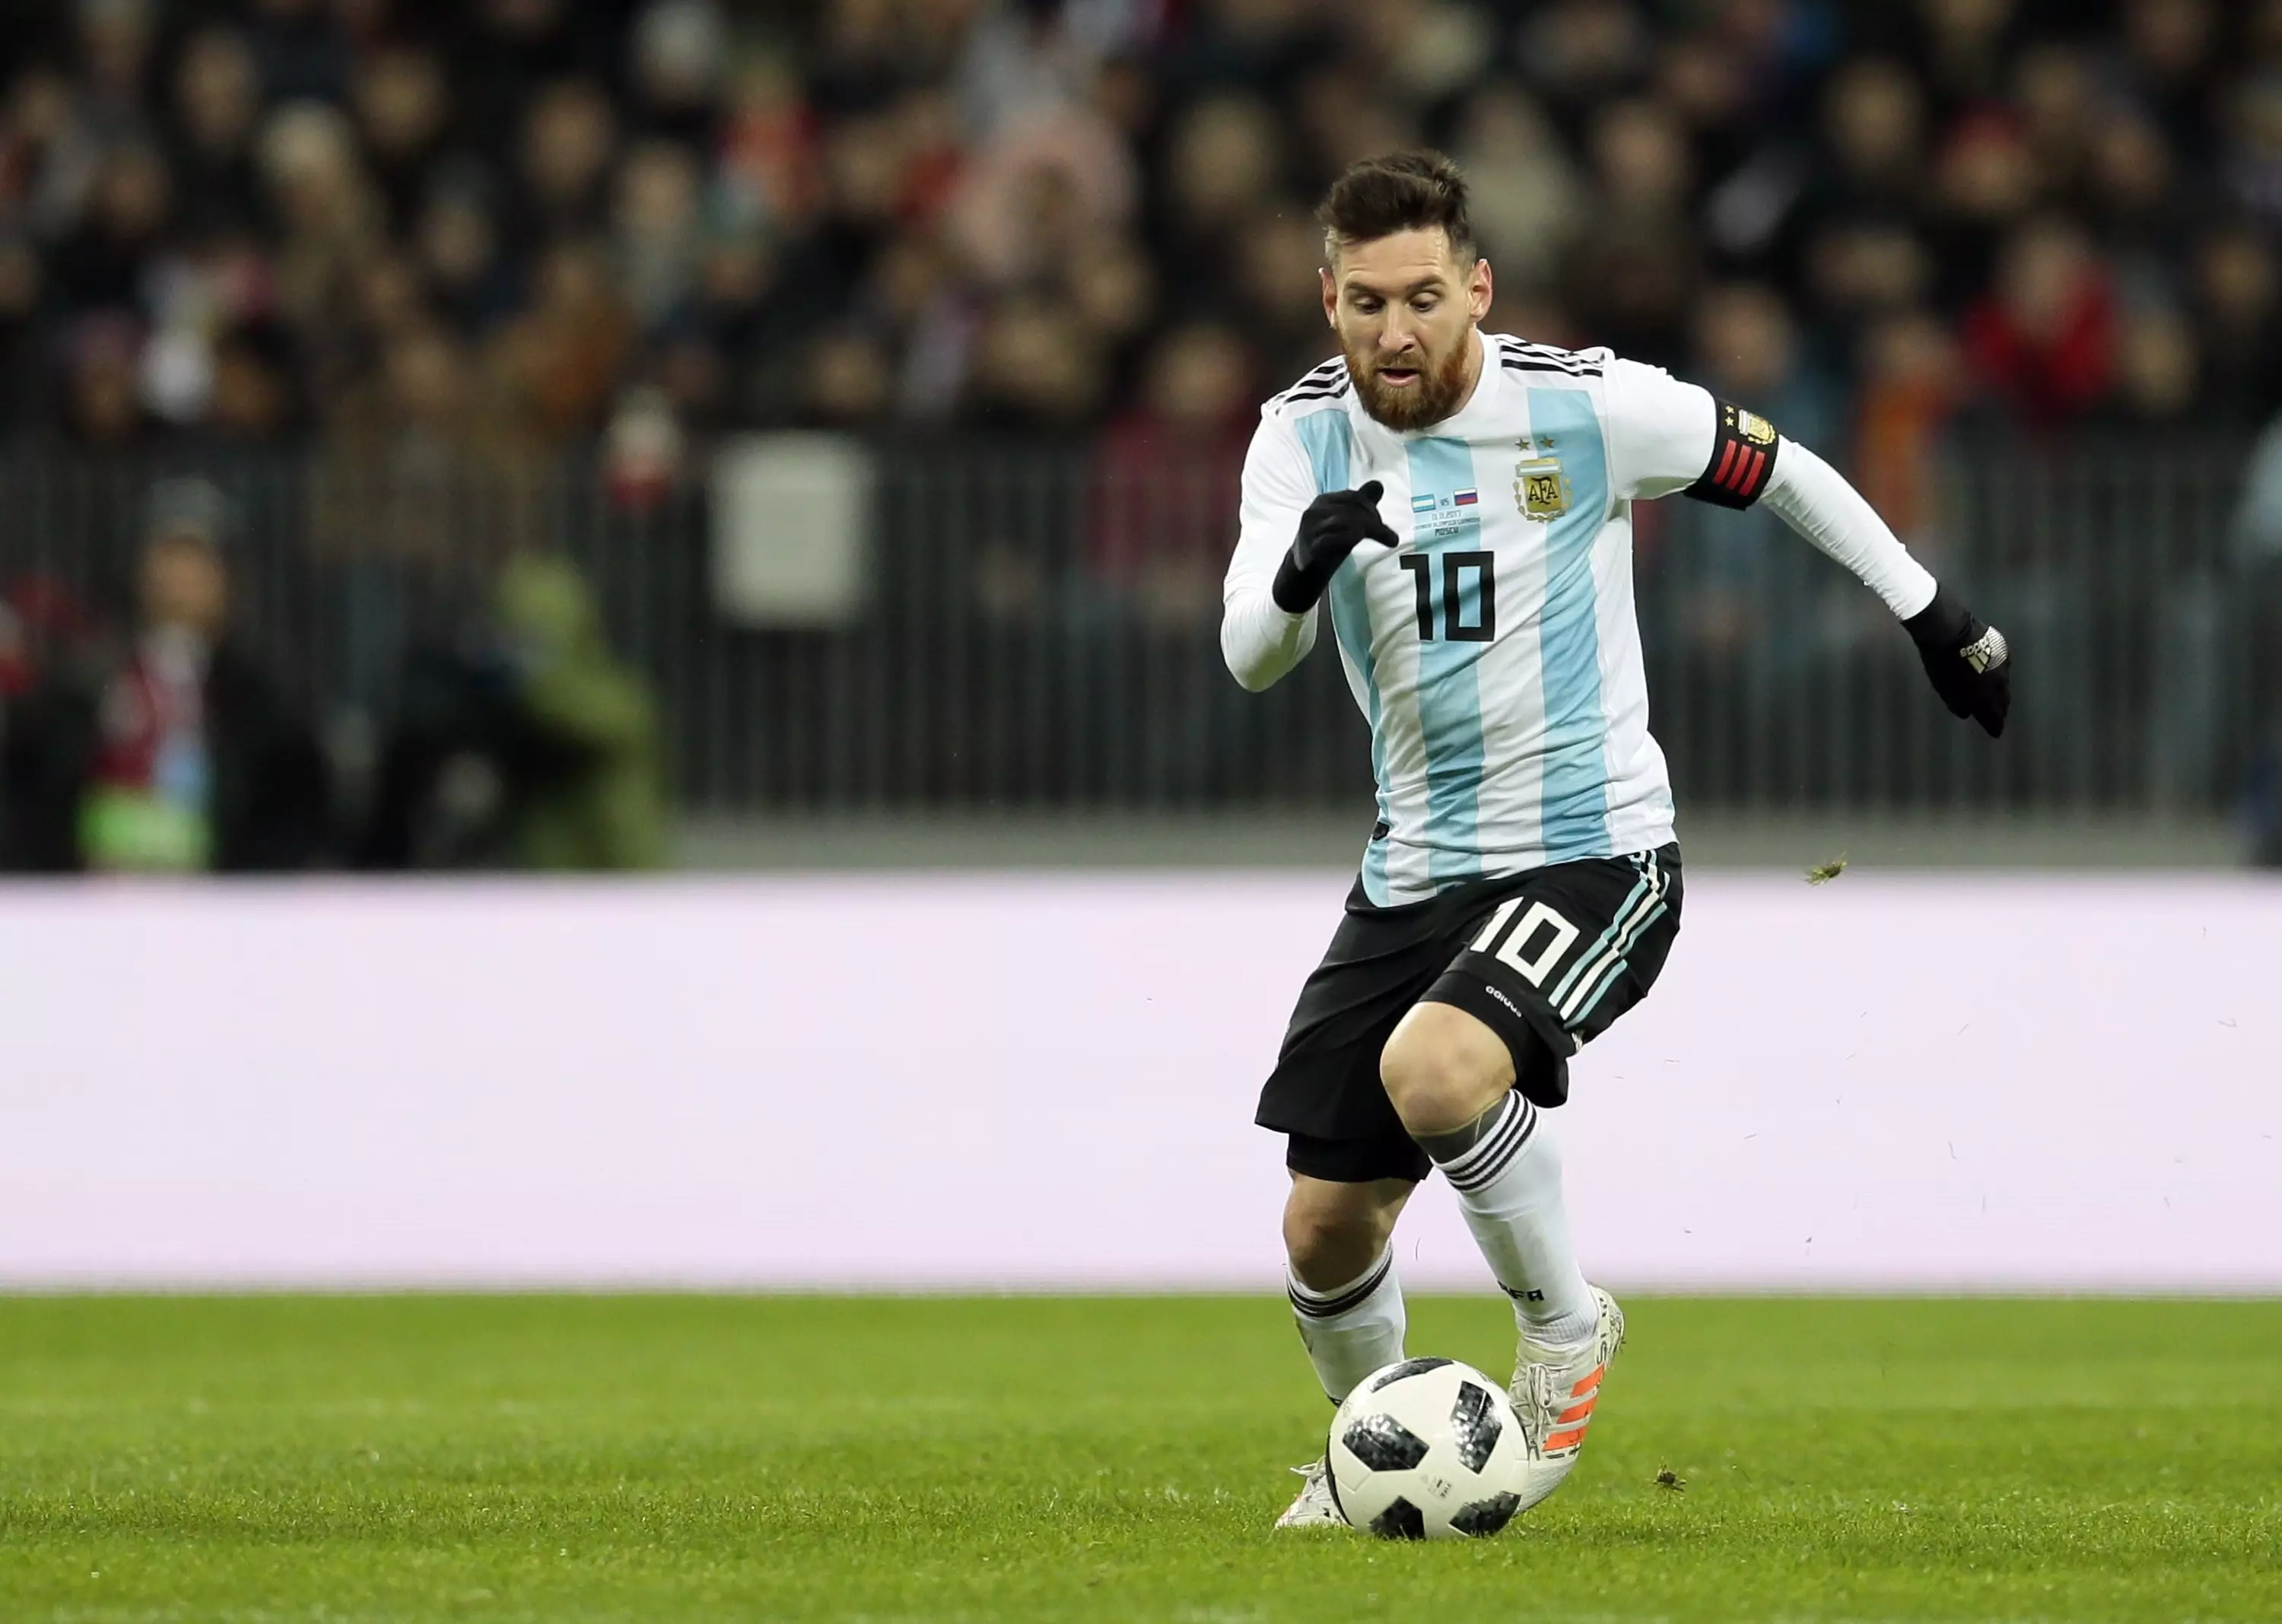 Argentina's hopes rest on Messi's shoulders. Can he win a second Player of the Tournament award in a row? Image: PA Images